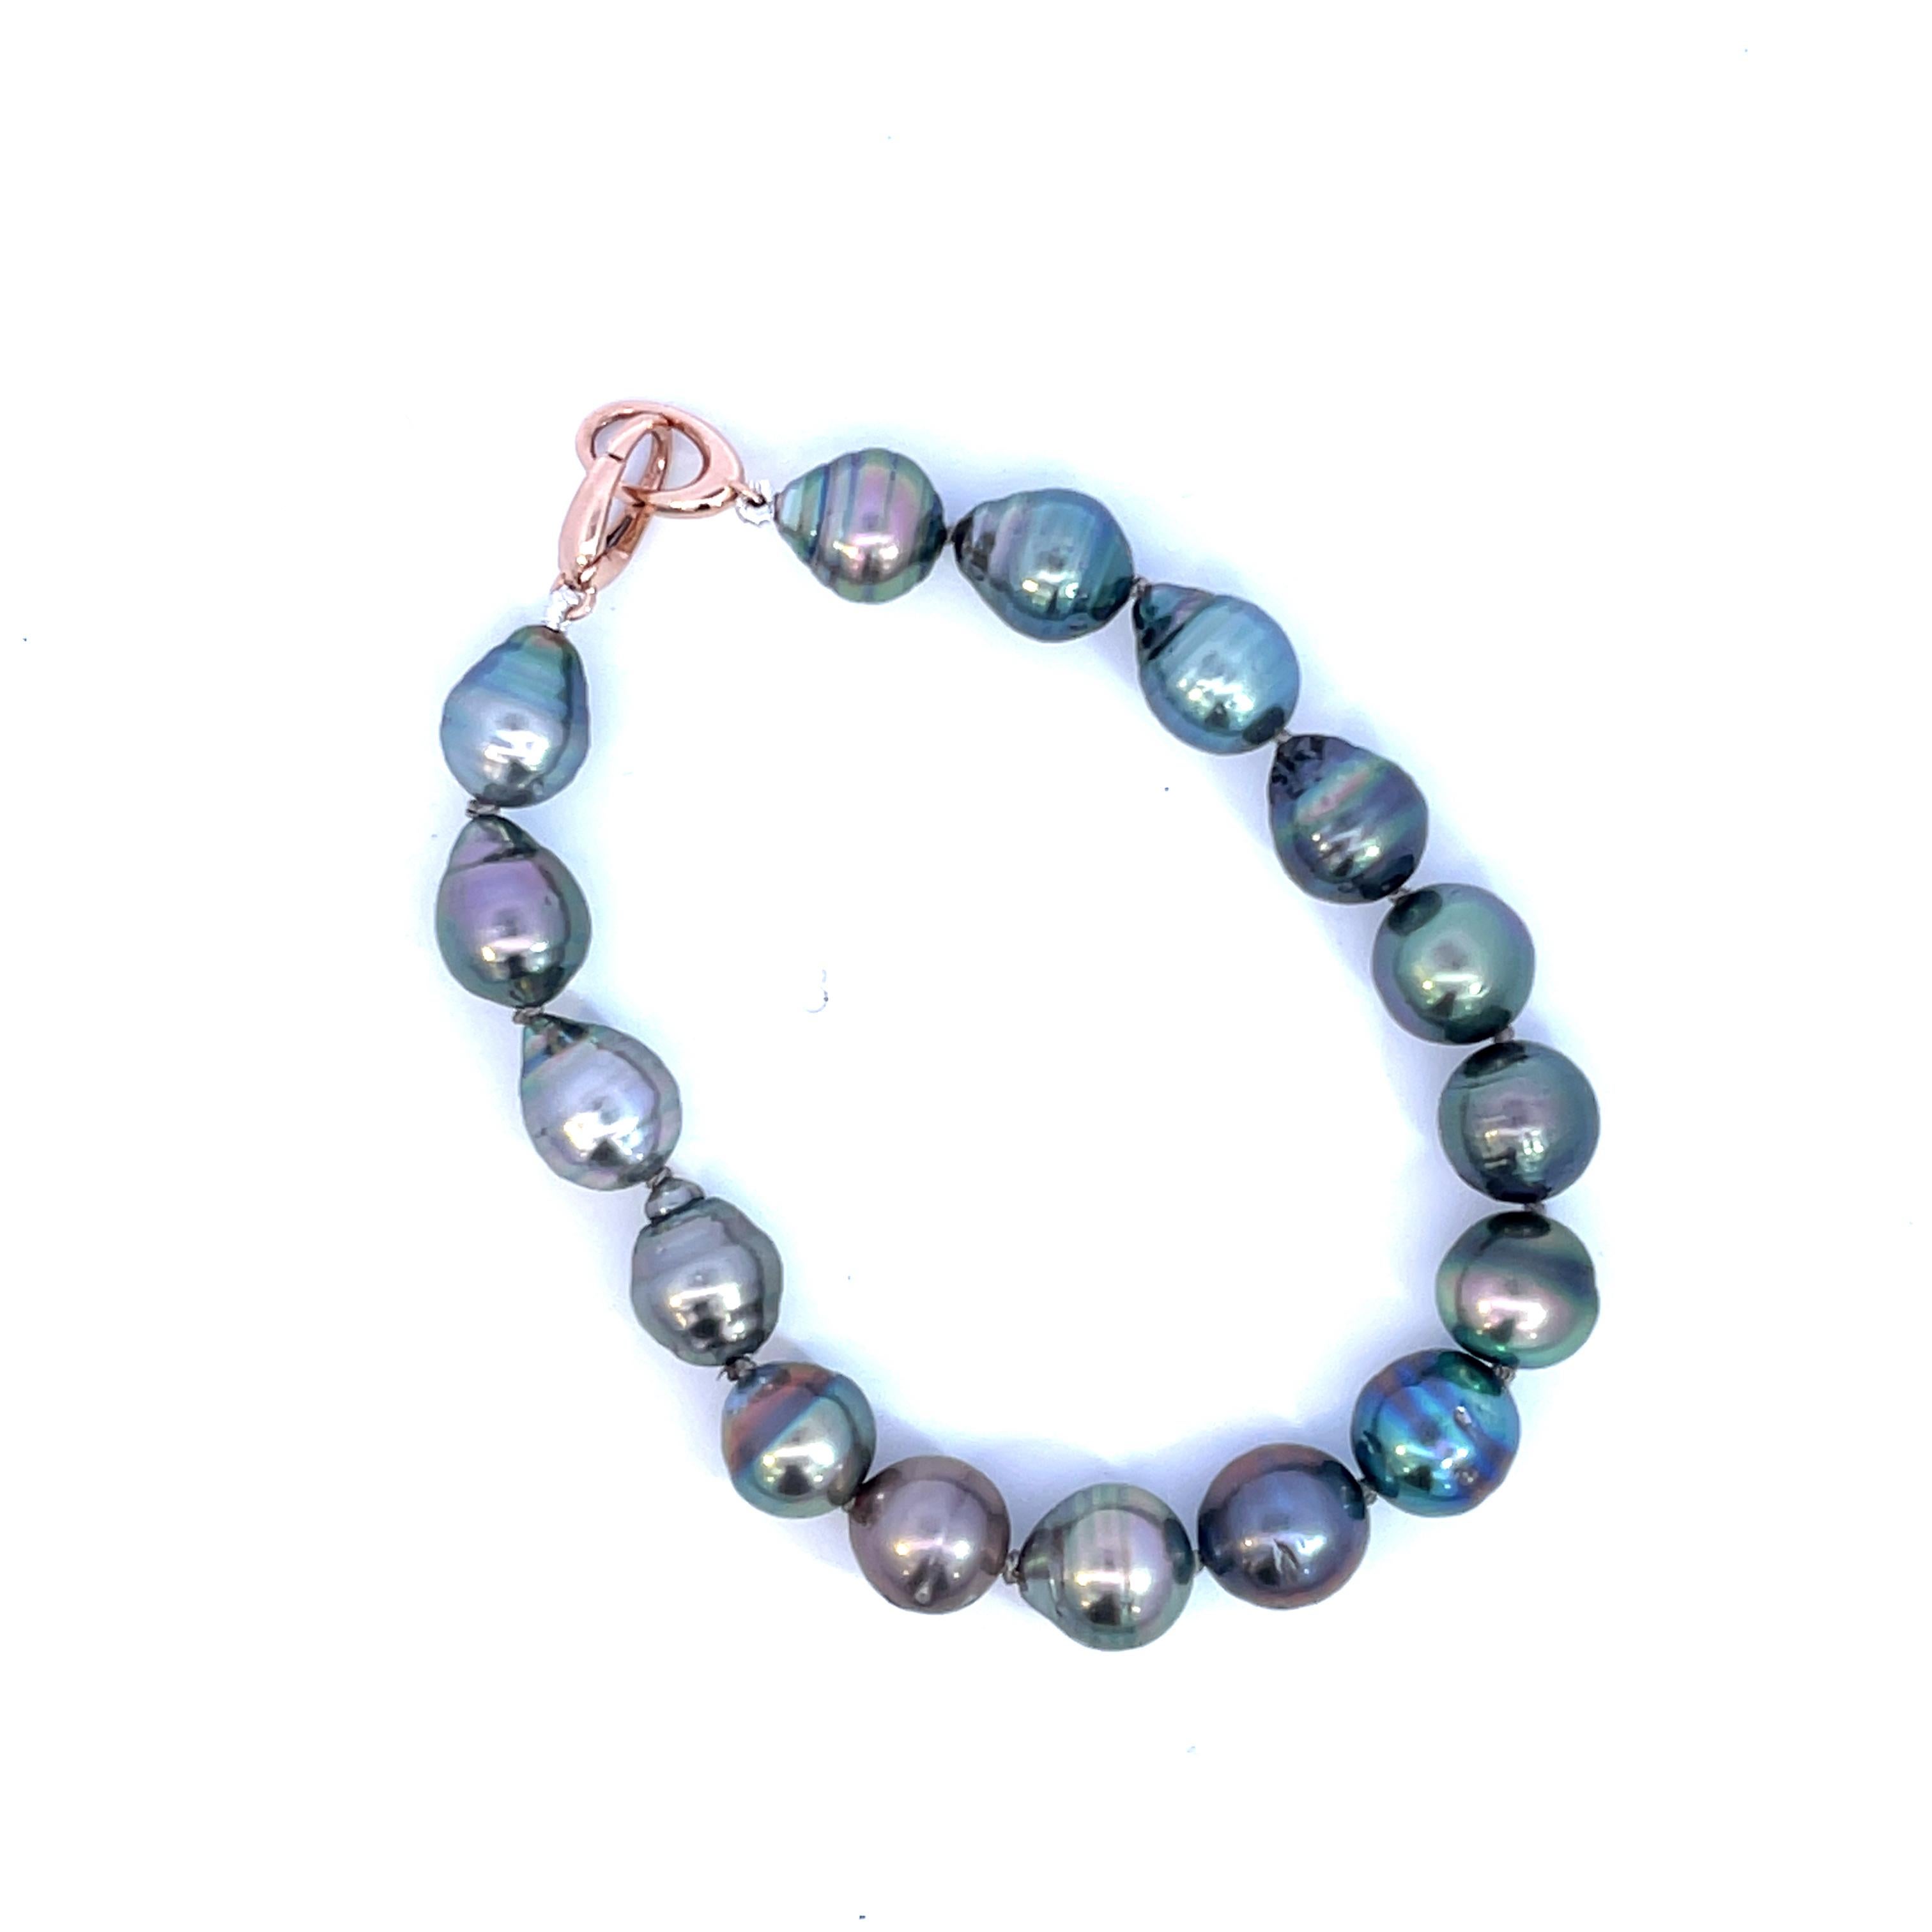 Bead Knotted Tahitian Pearl Bracelet with 14k Rose Gold Triggerless Clasp For Sale